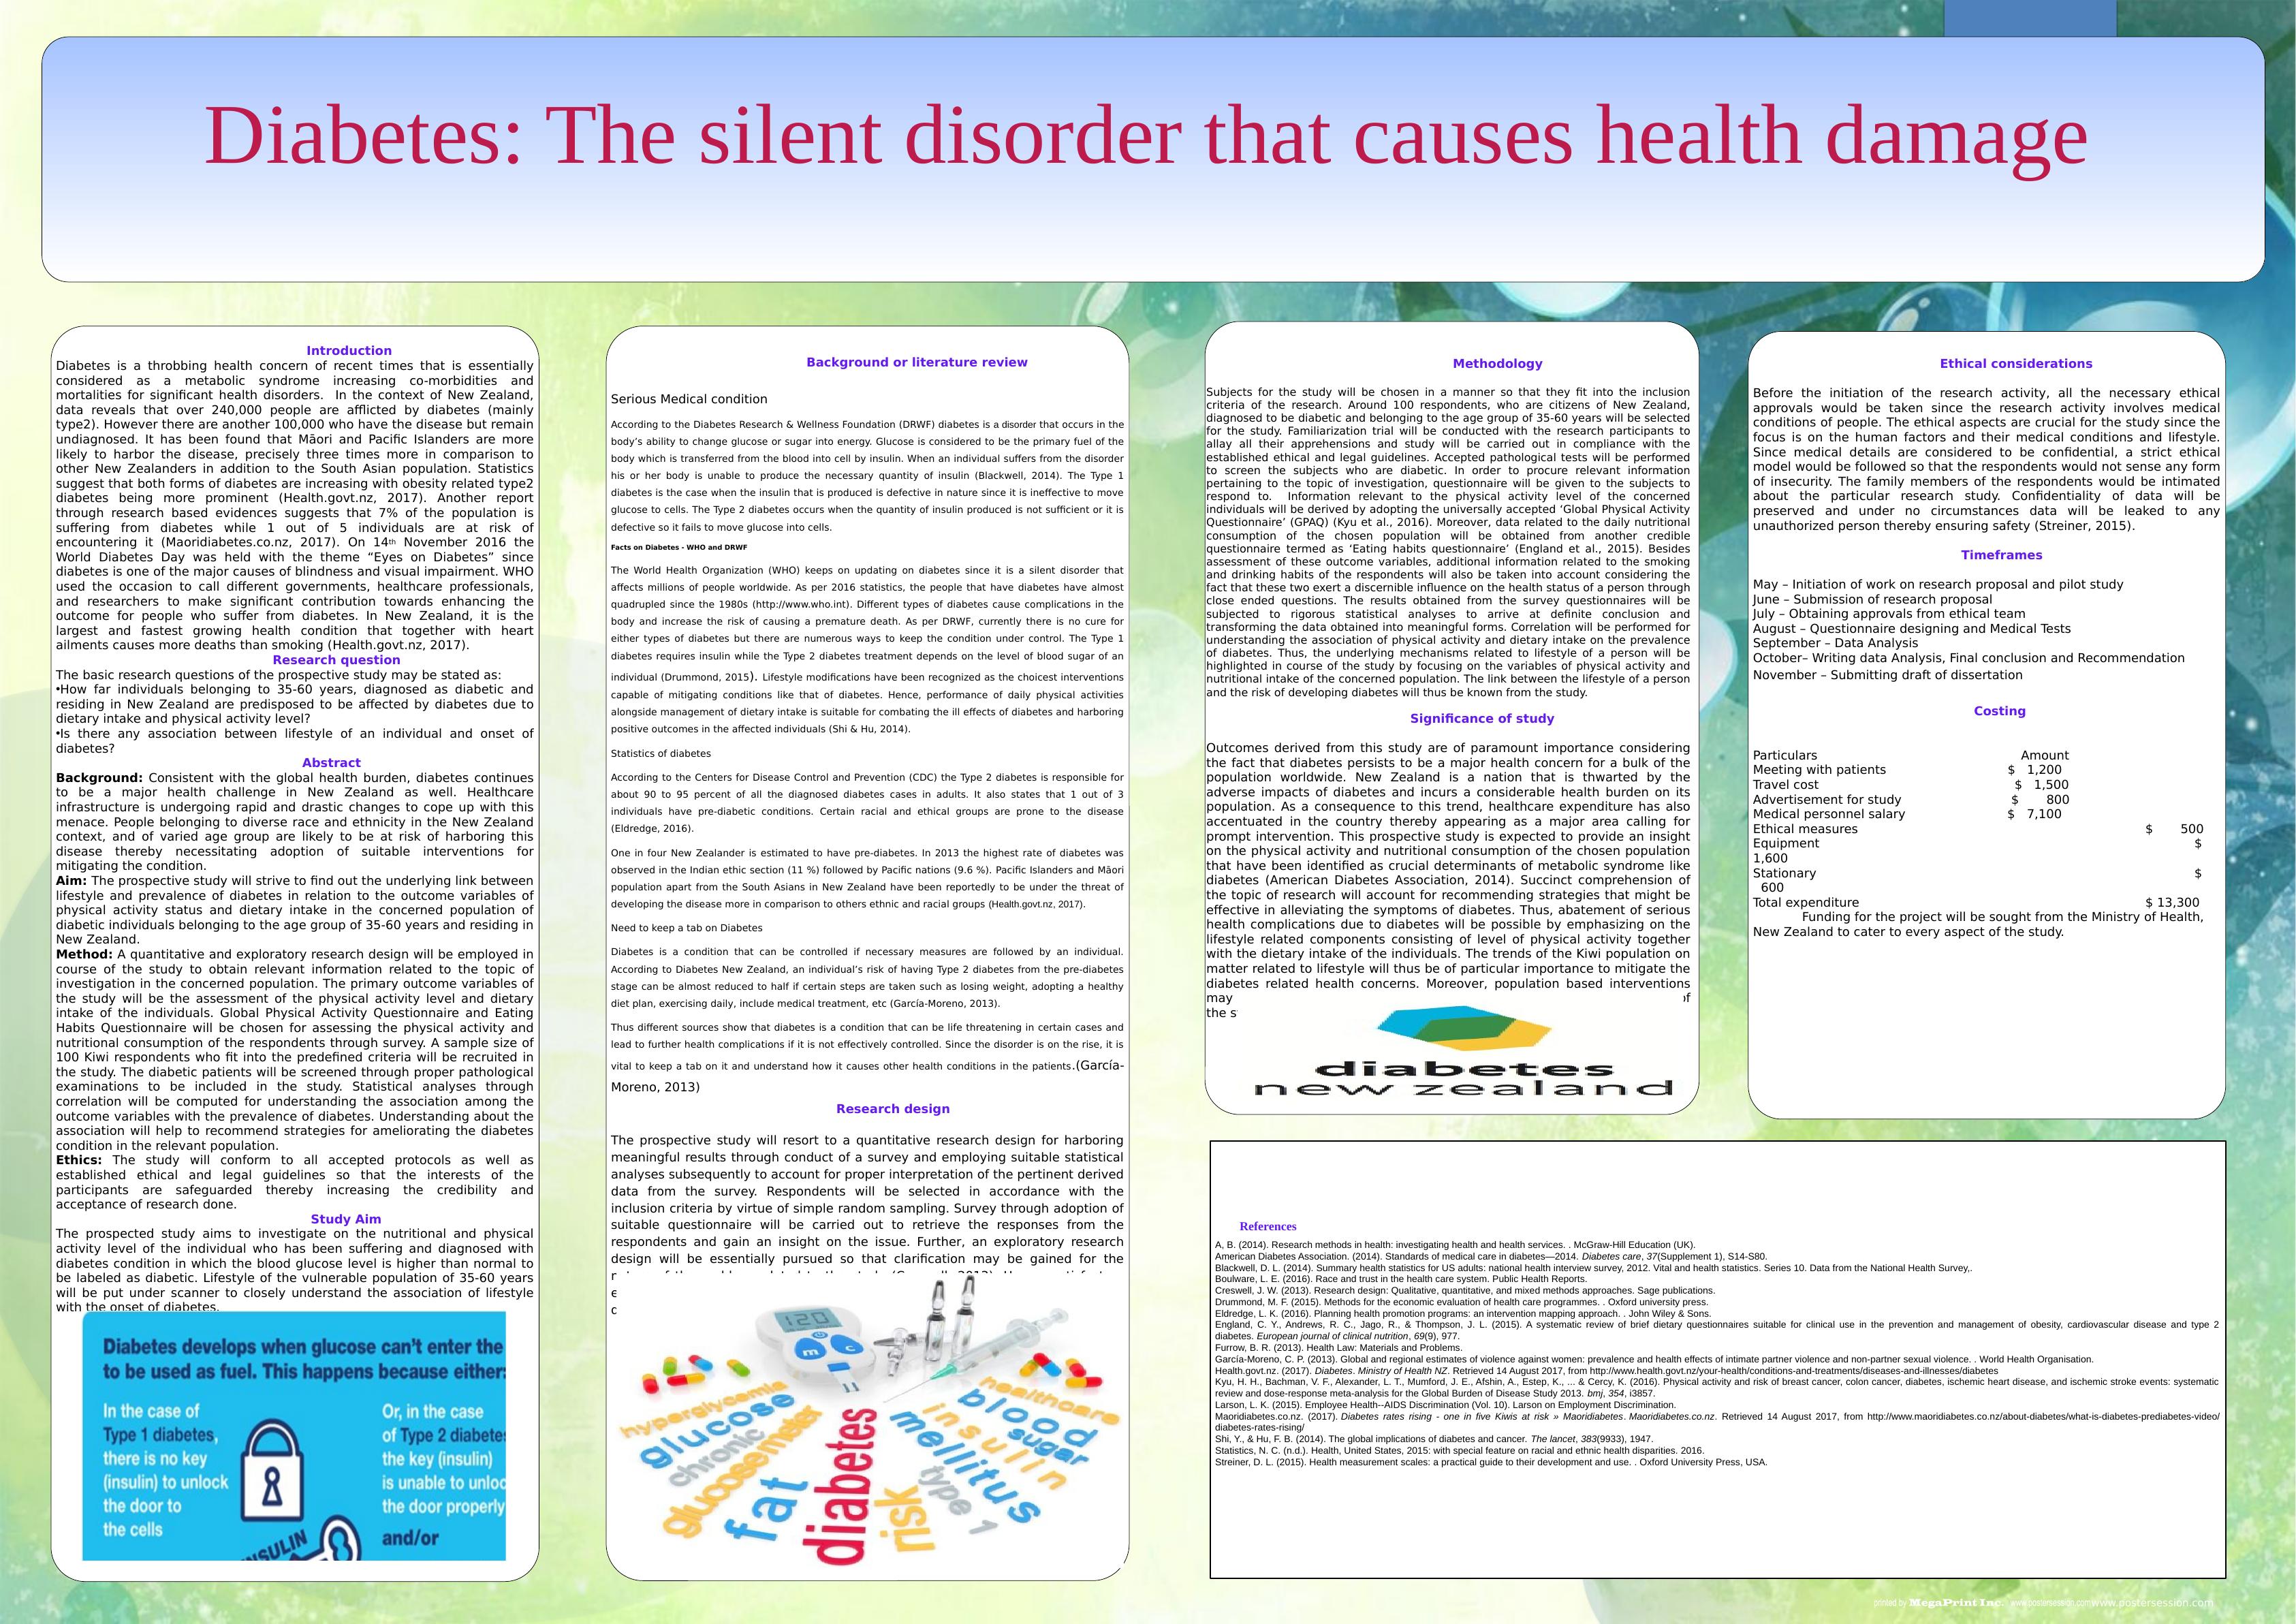 Diabetes: The Silent Disorder and Its Association with Lifestyle Factors in New Zealand_1